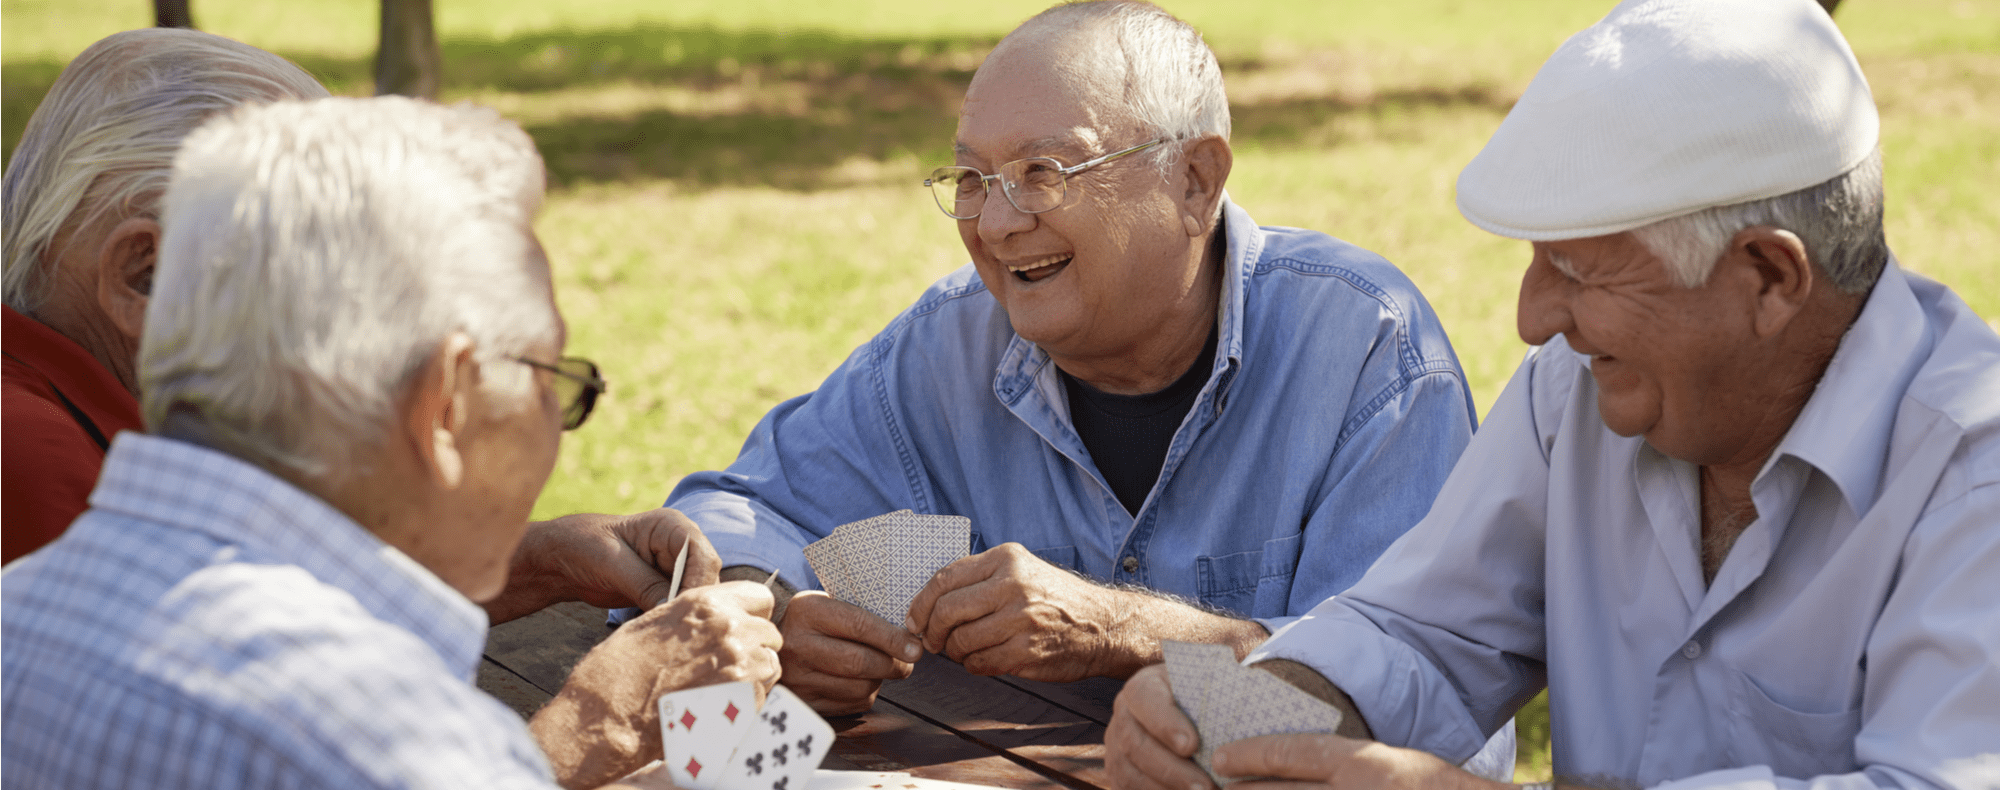 Six Steps for a Thriving Retirement